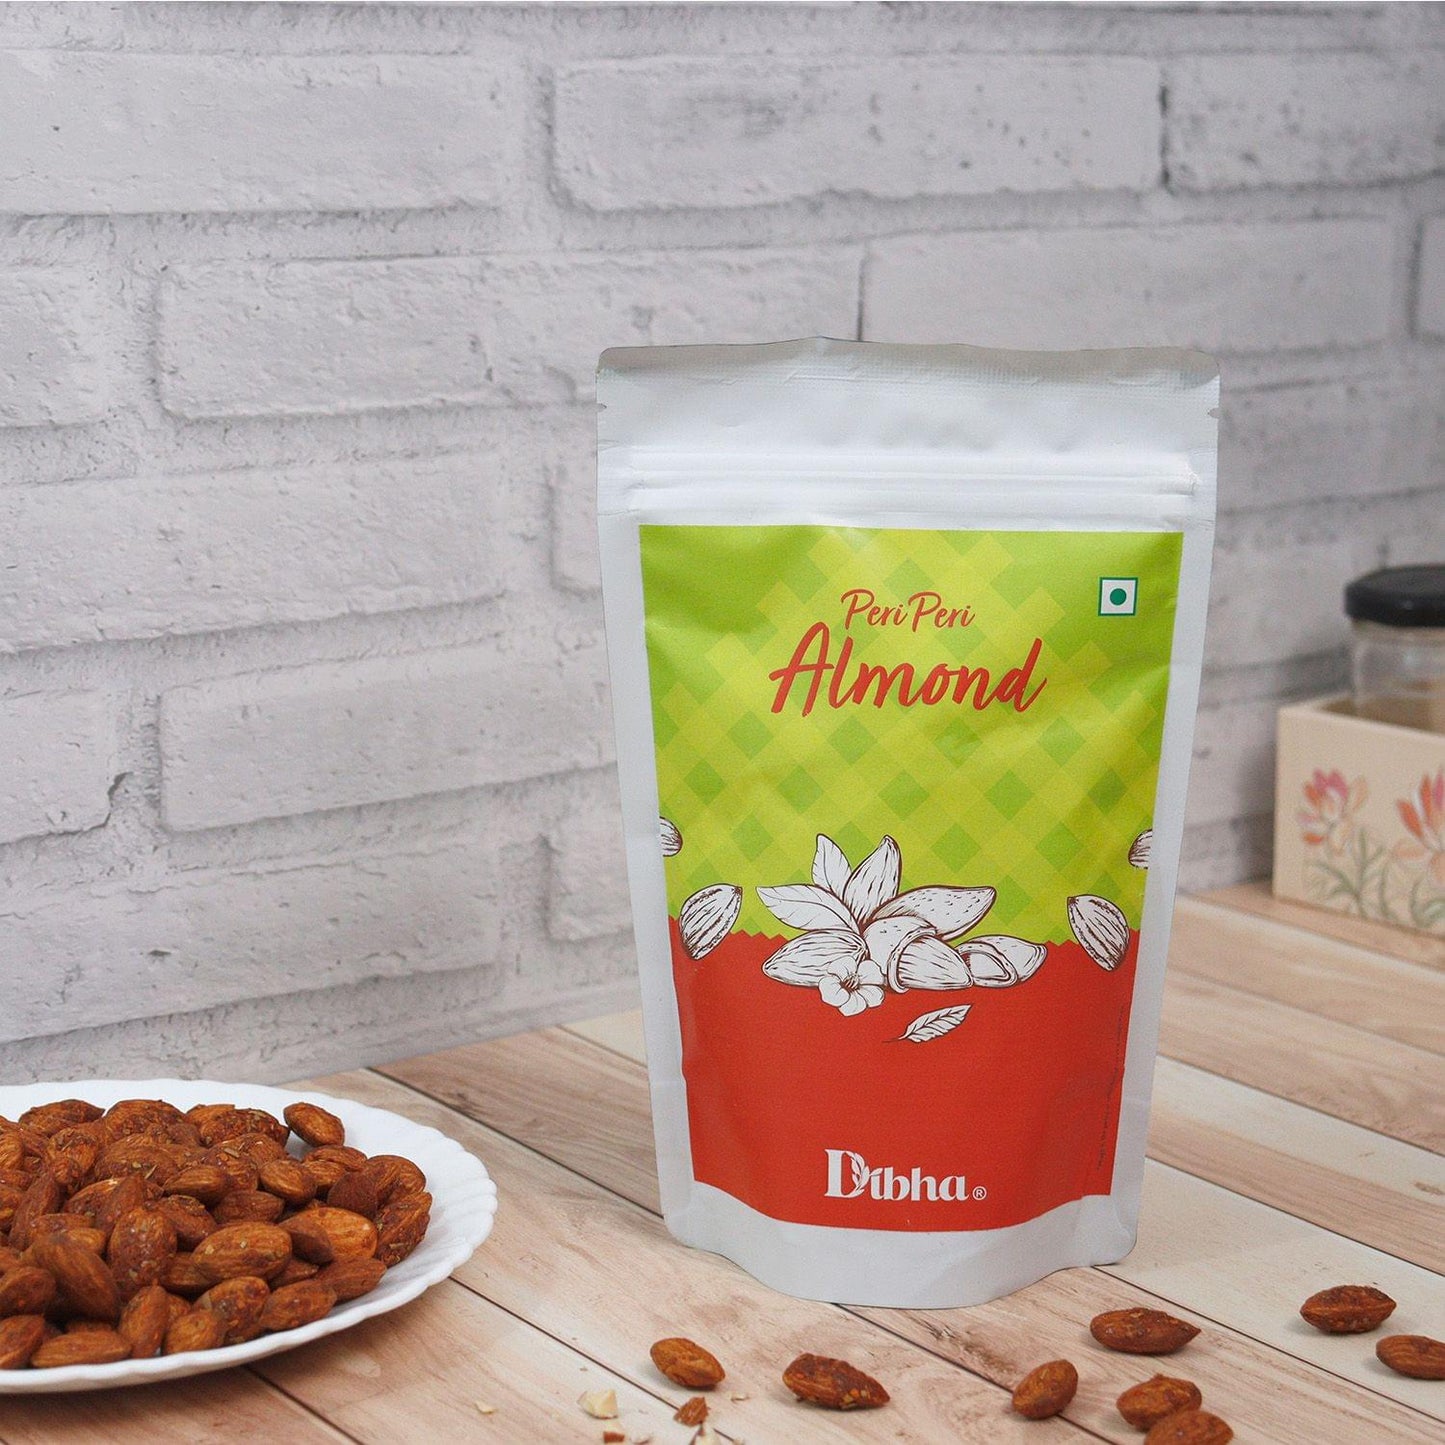 DIBHA - HONEST SNACKING Peri Peri Almonds 200g (Snacking, Healthy, Gluten-Free, Vegan, Dry Fruit, High in Protien & Fiber Snack and Super Healthy For taste, fitness and Immunity Tasty Dry Fruits)